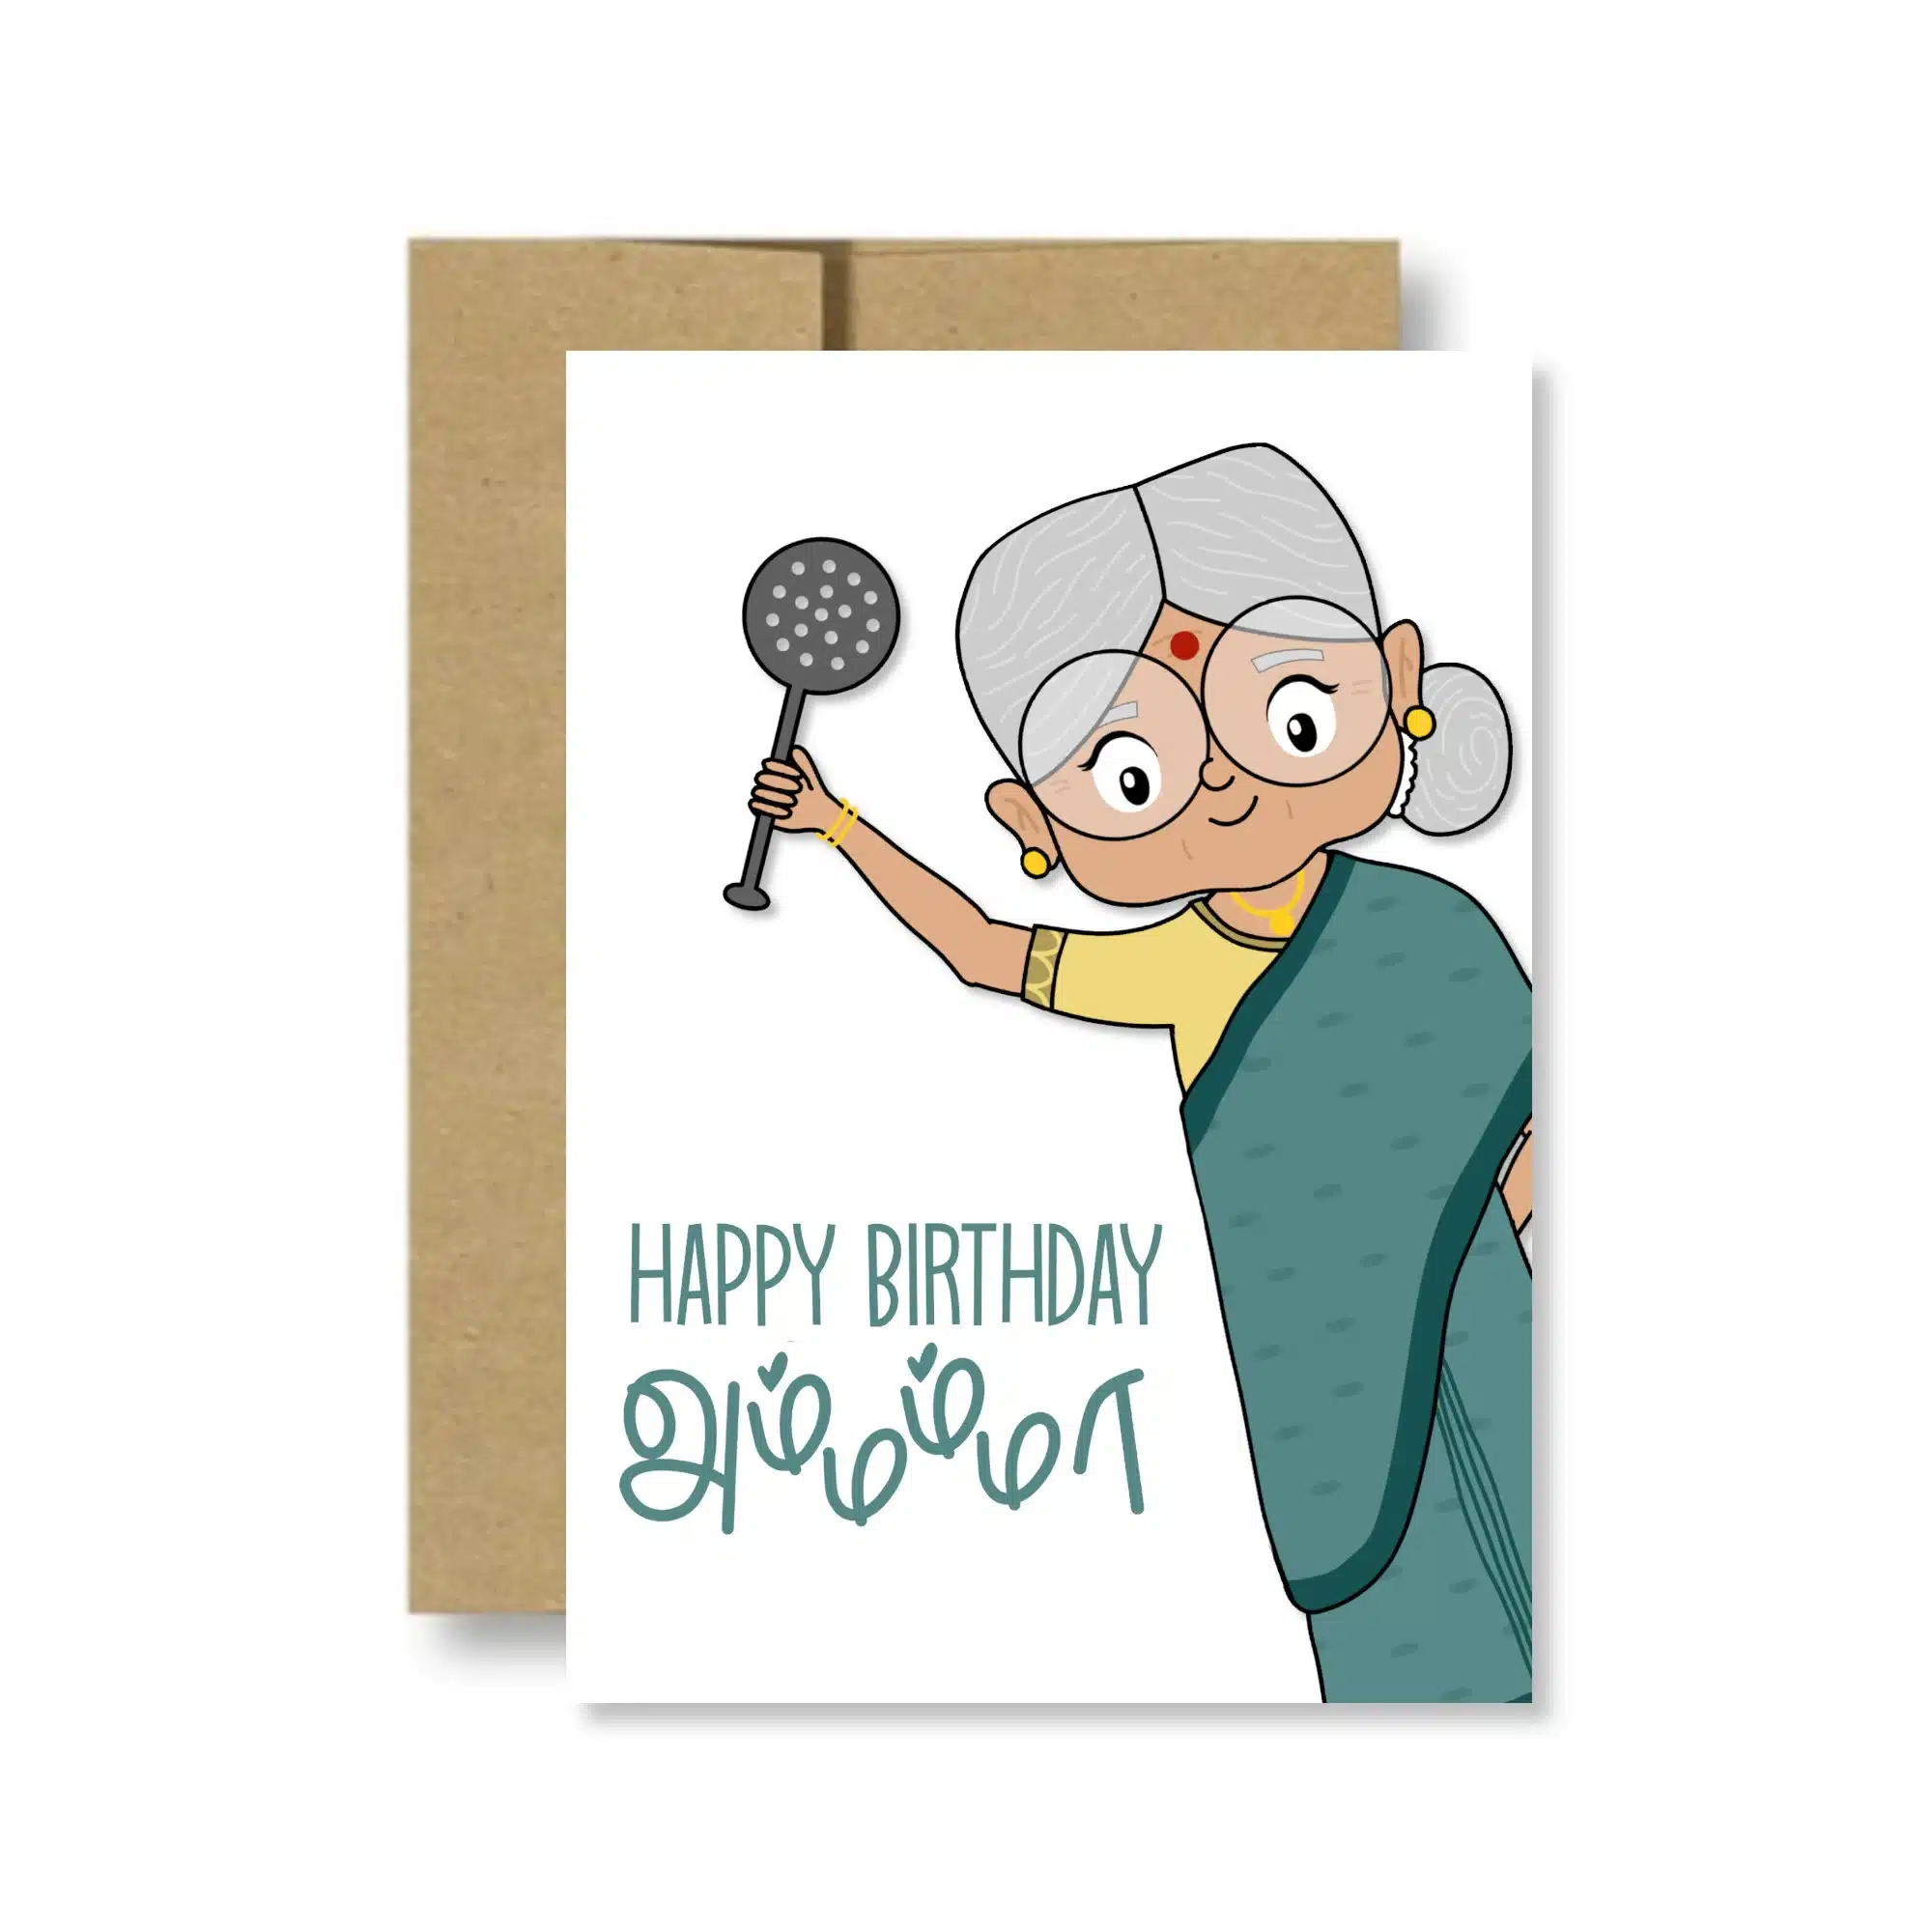 haapy birthday wishes for grandmother